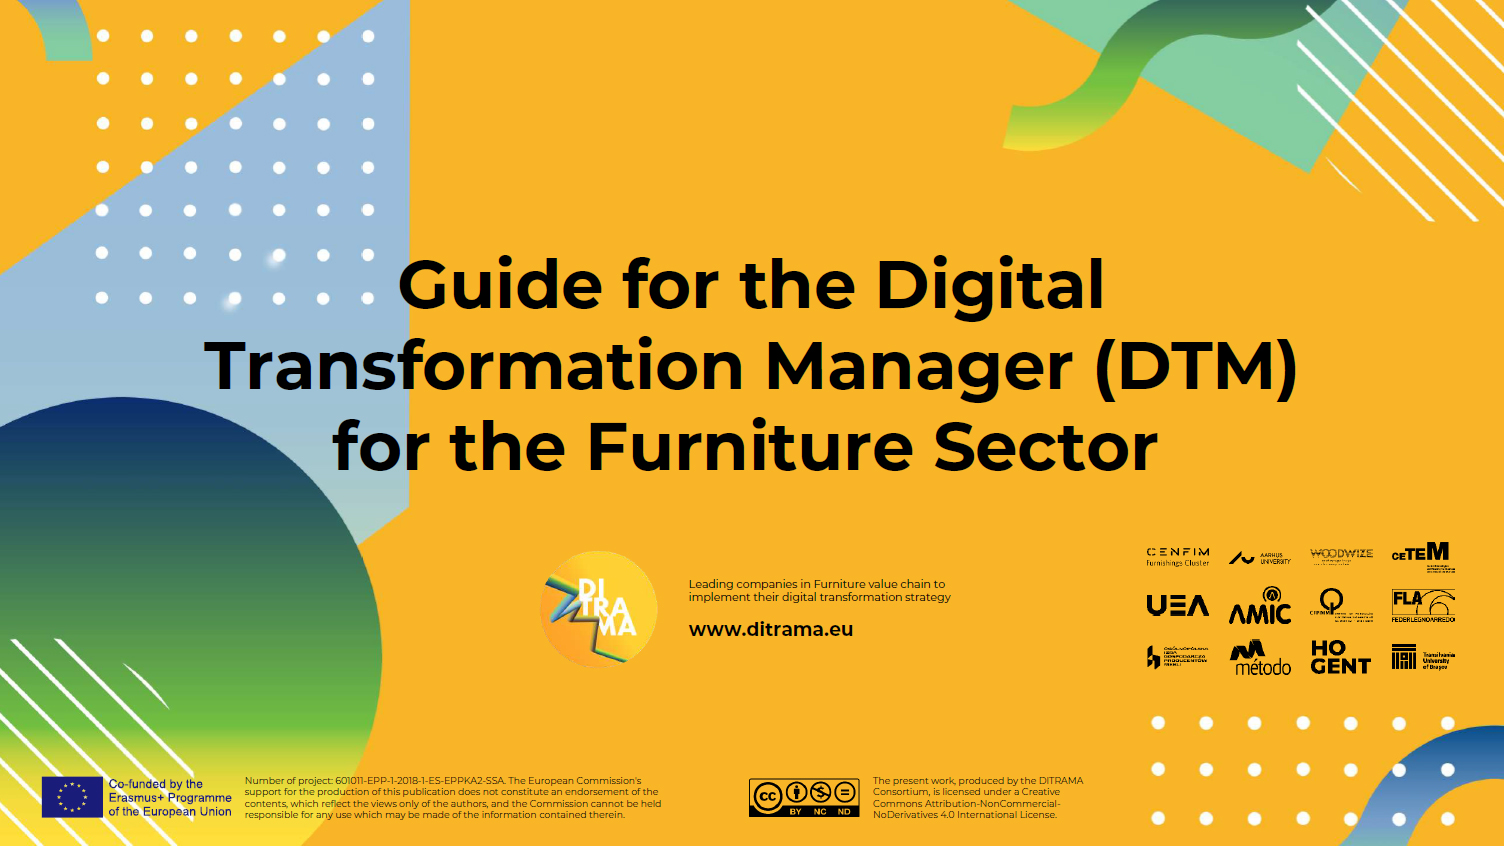 Guide for the Digital Transformation Manager (DTM) for the Furniture Sector